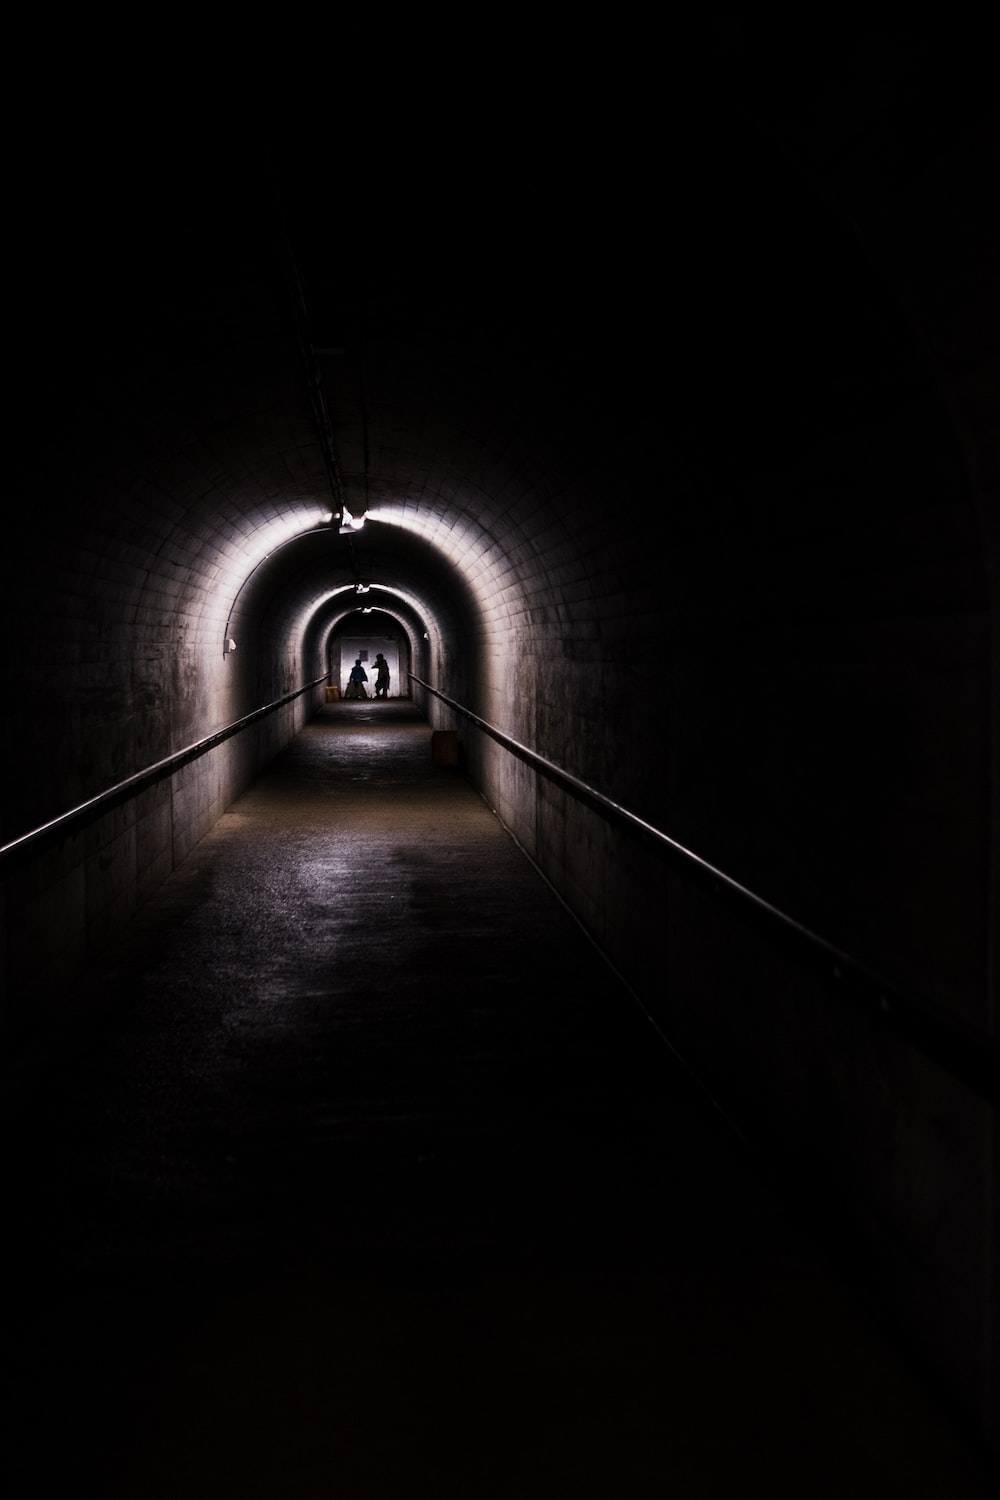 Dark Tunnel Picture. Download Free Image